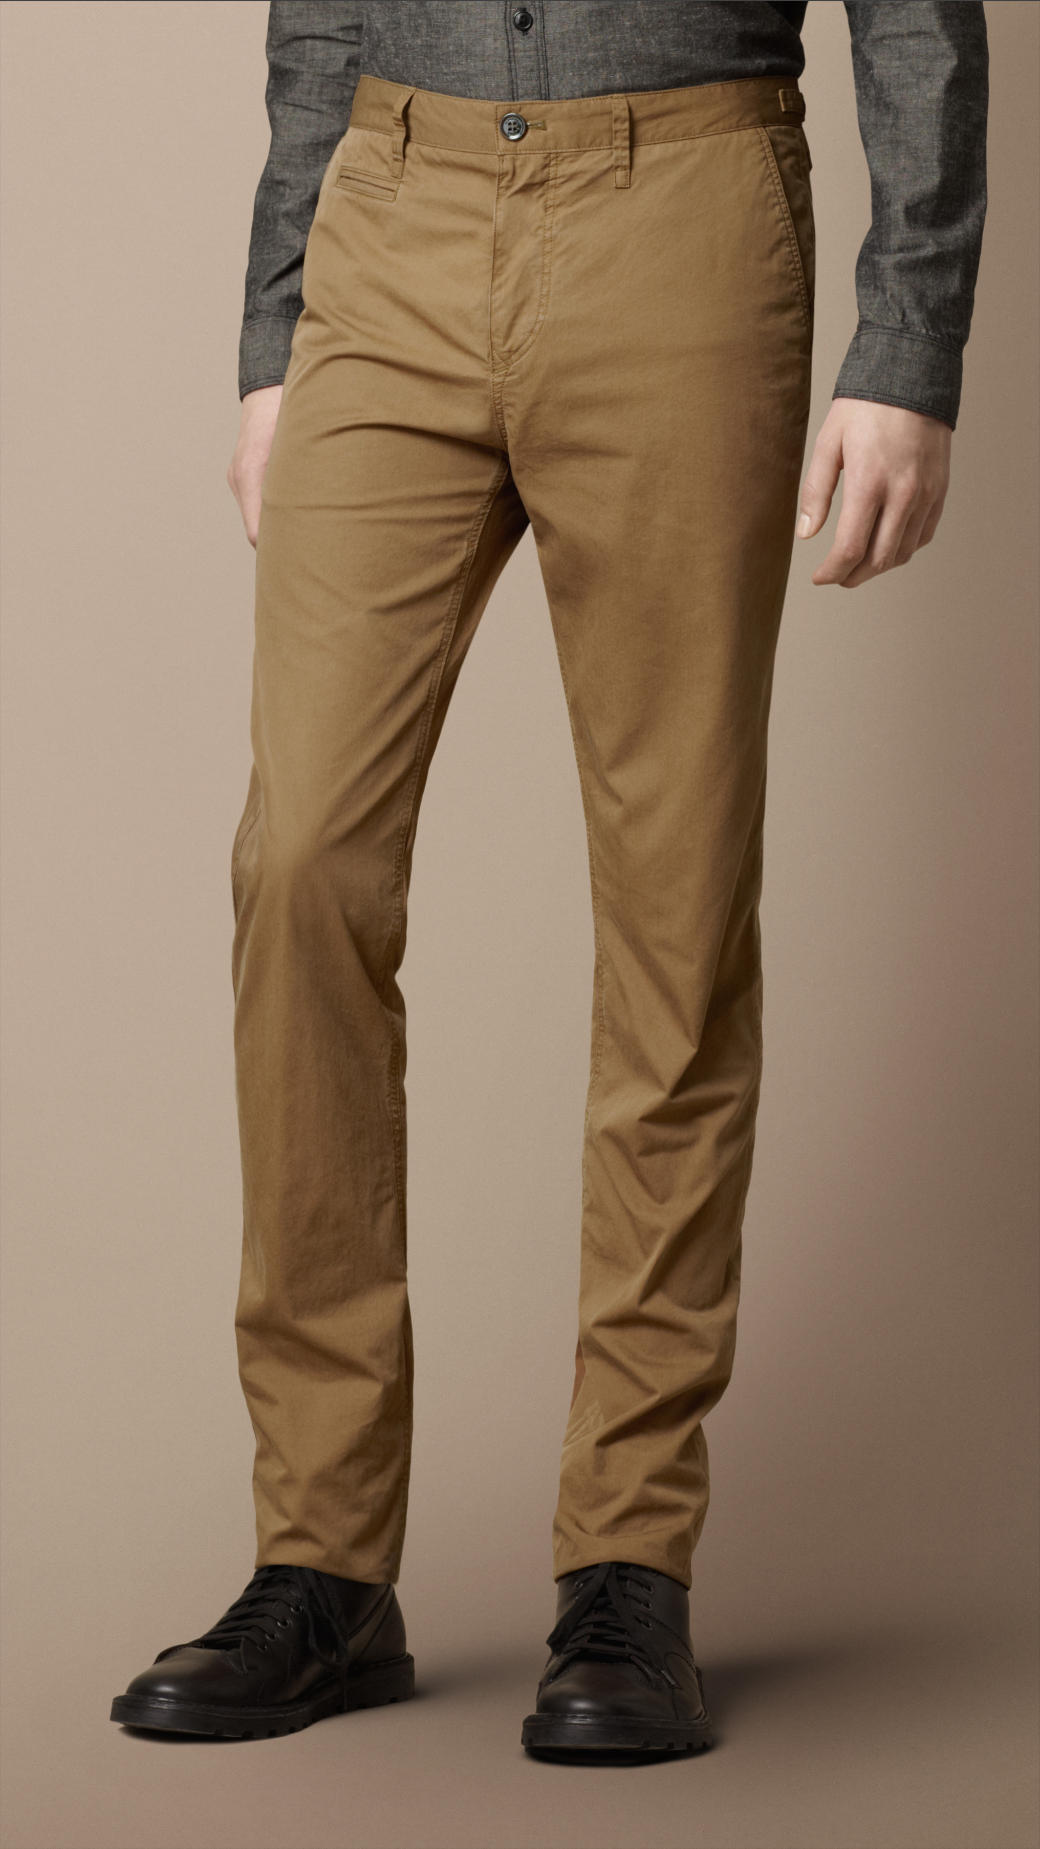 Lyst - Burberry Brit Workwear Cotton Chino Trousers in Brown for Men